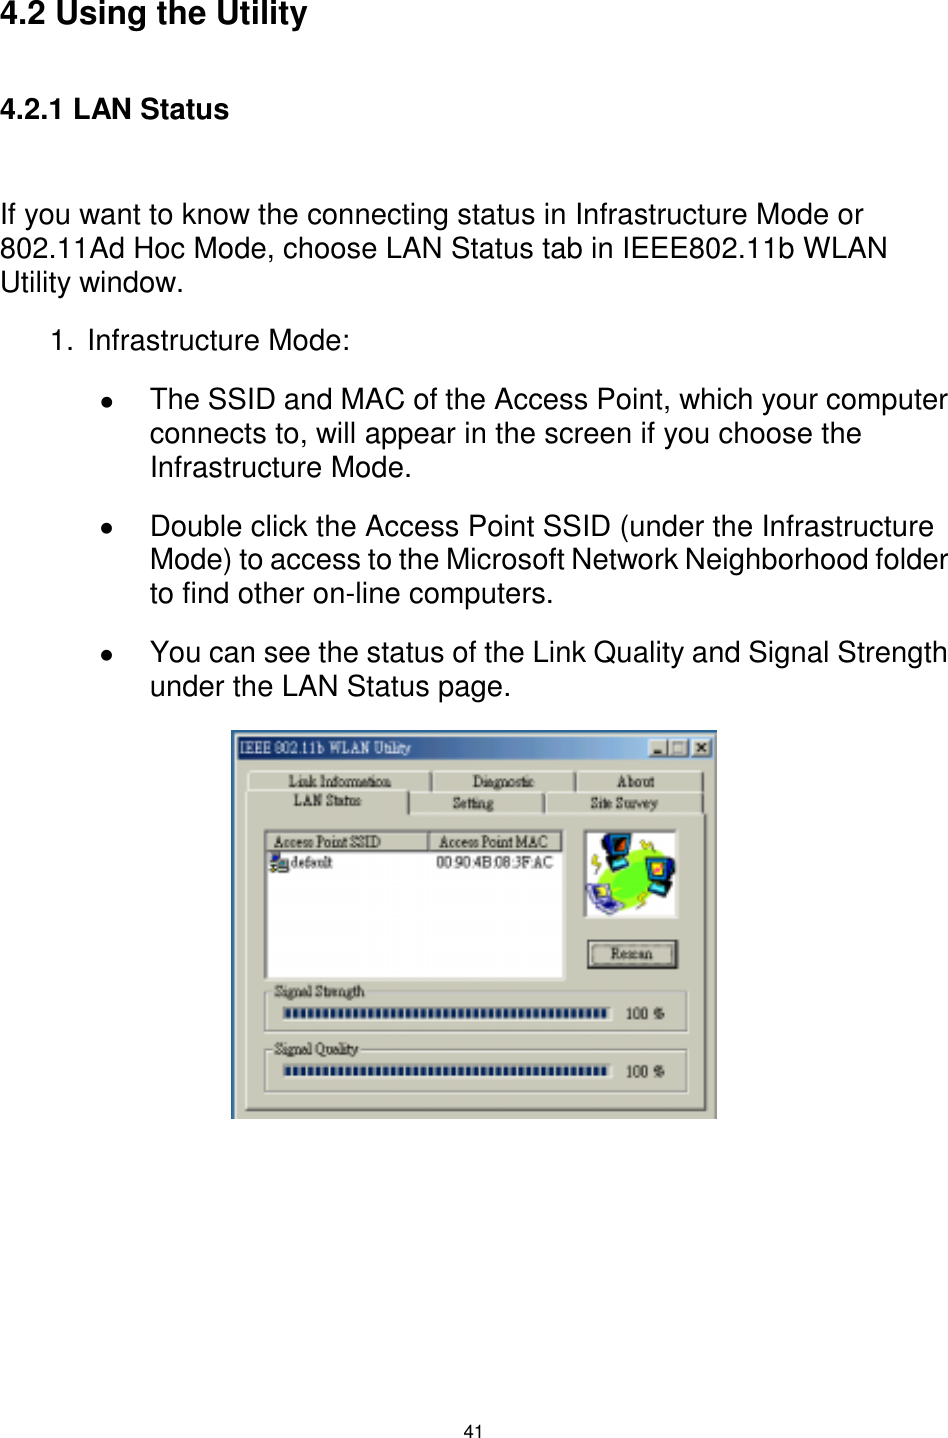  41  4.2 Using the Utility  4.2.1 LAN Status  If you want to know the connecting status in Infrastructure Mode or 802.11Ad Hoc Mode, choose LAN Status tab in IEEE802.11b WLAN Utility window. 1. Infrastructure Mode: !  The SSID and MAC of the Access Point, which your computer connects to, will appear in the screen if you choose the Infrastructure Mode. !  Double click the Access Point SSID (under the Infrastructure Mode) to access to the Microsoft Network Neighborhood folder to find other on-line computers. !  You can see the status of the Link Quality and Signal Strength under the LAN Status page.                  